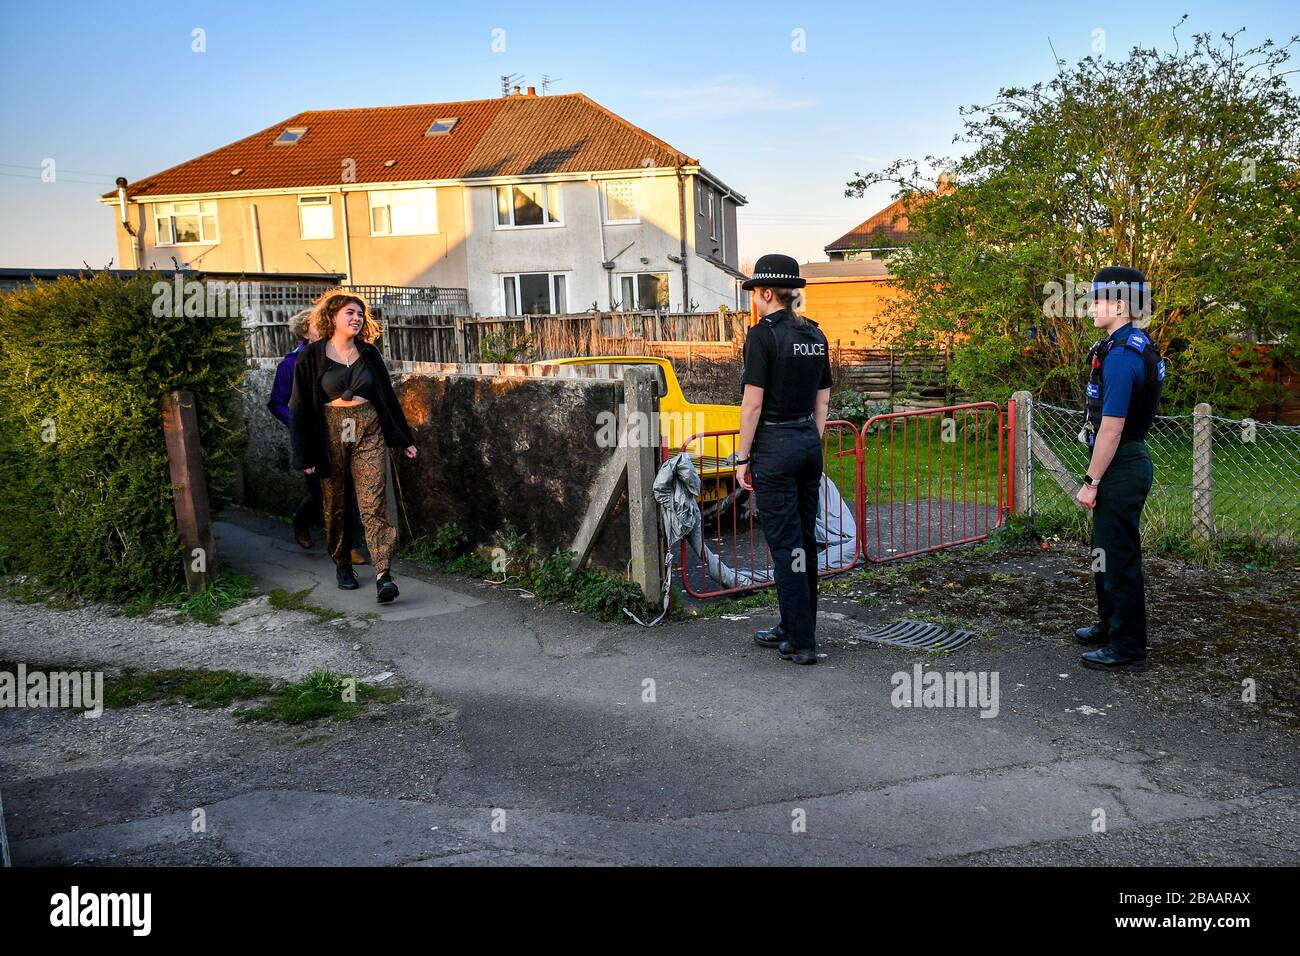 Avon and Somerset Police officers let people pass at a safe distance in Bristol, where they are patrolling and enforcing the coronavirus lockdown rules. Stock Photo